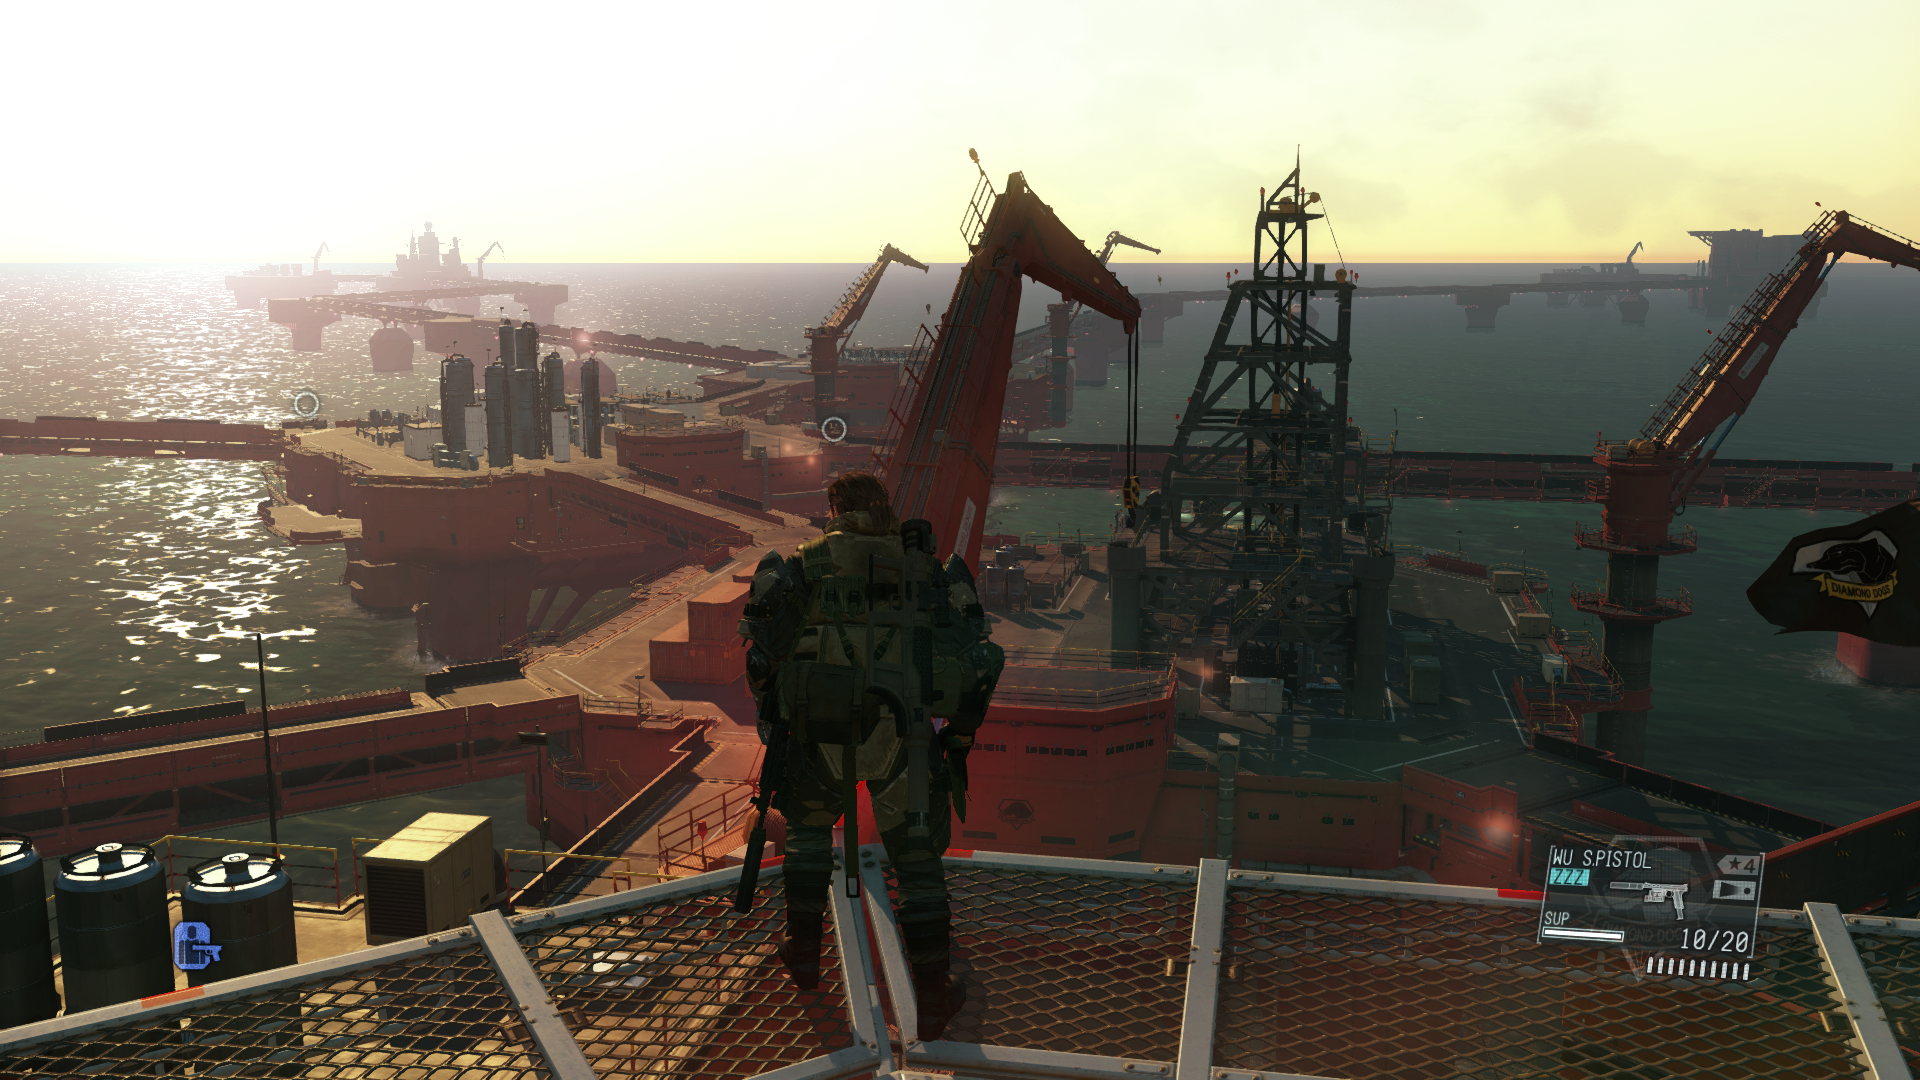 METAL-GEAR-SOLID-V_-THE-PHANTOM-PAIN-14-09-2015-17_04_32.png